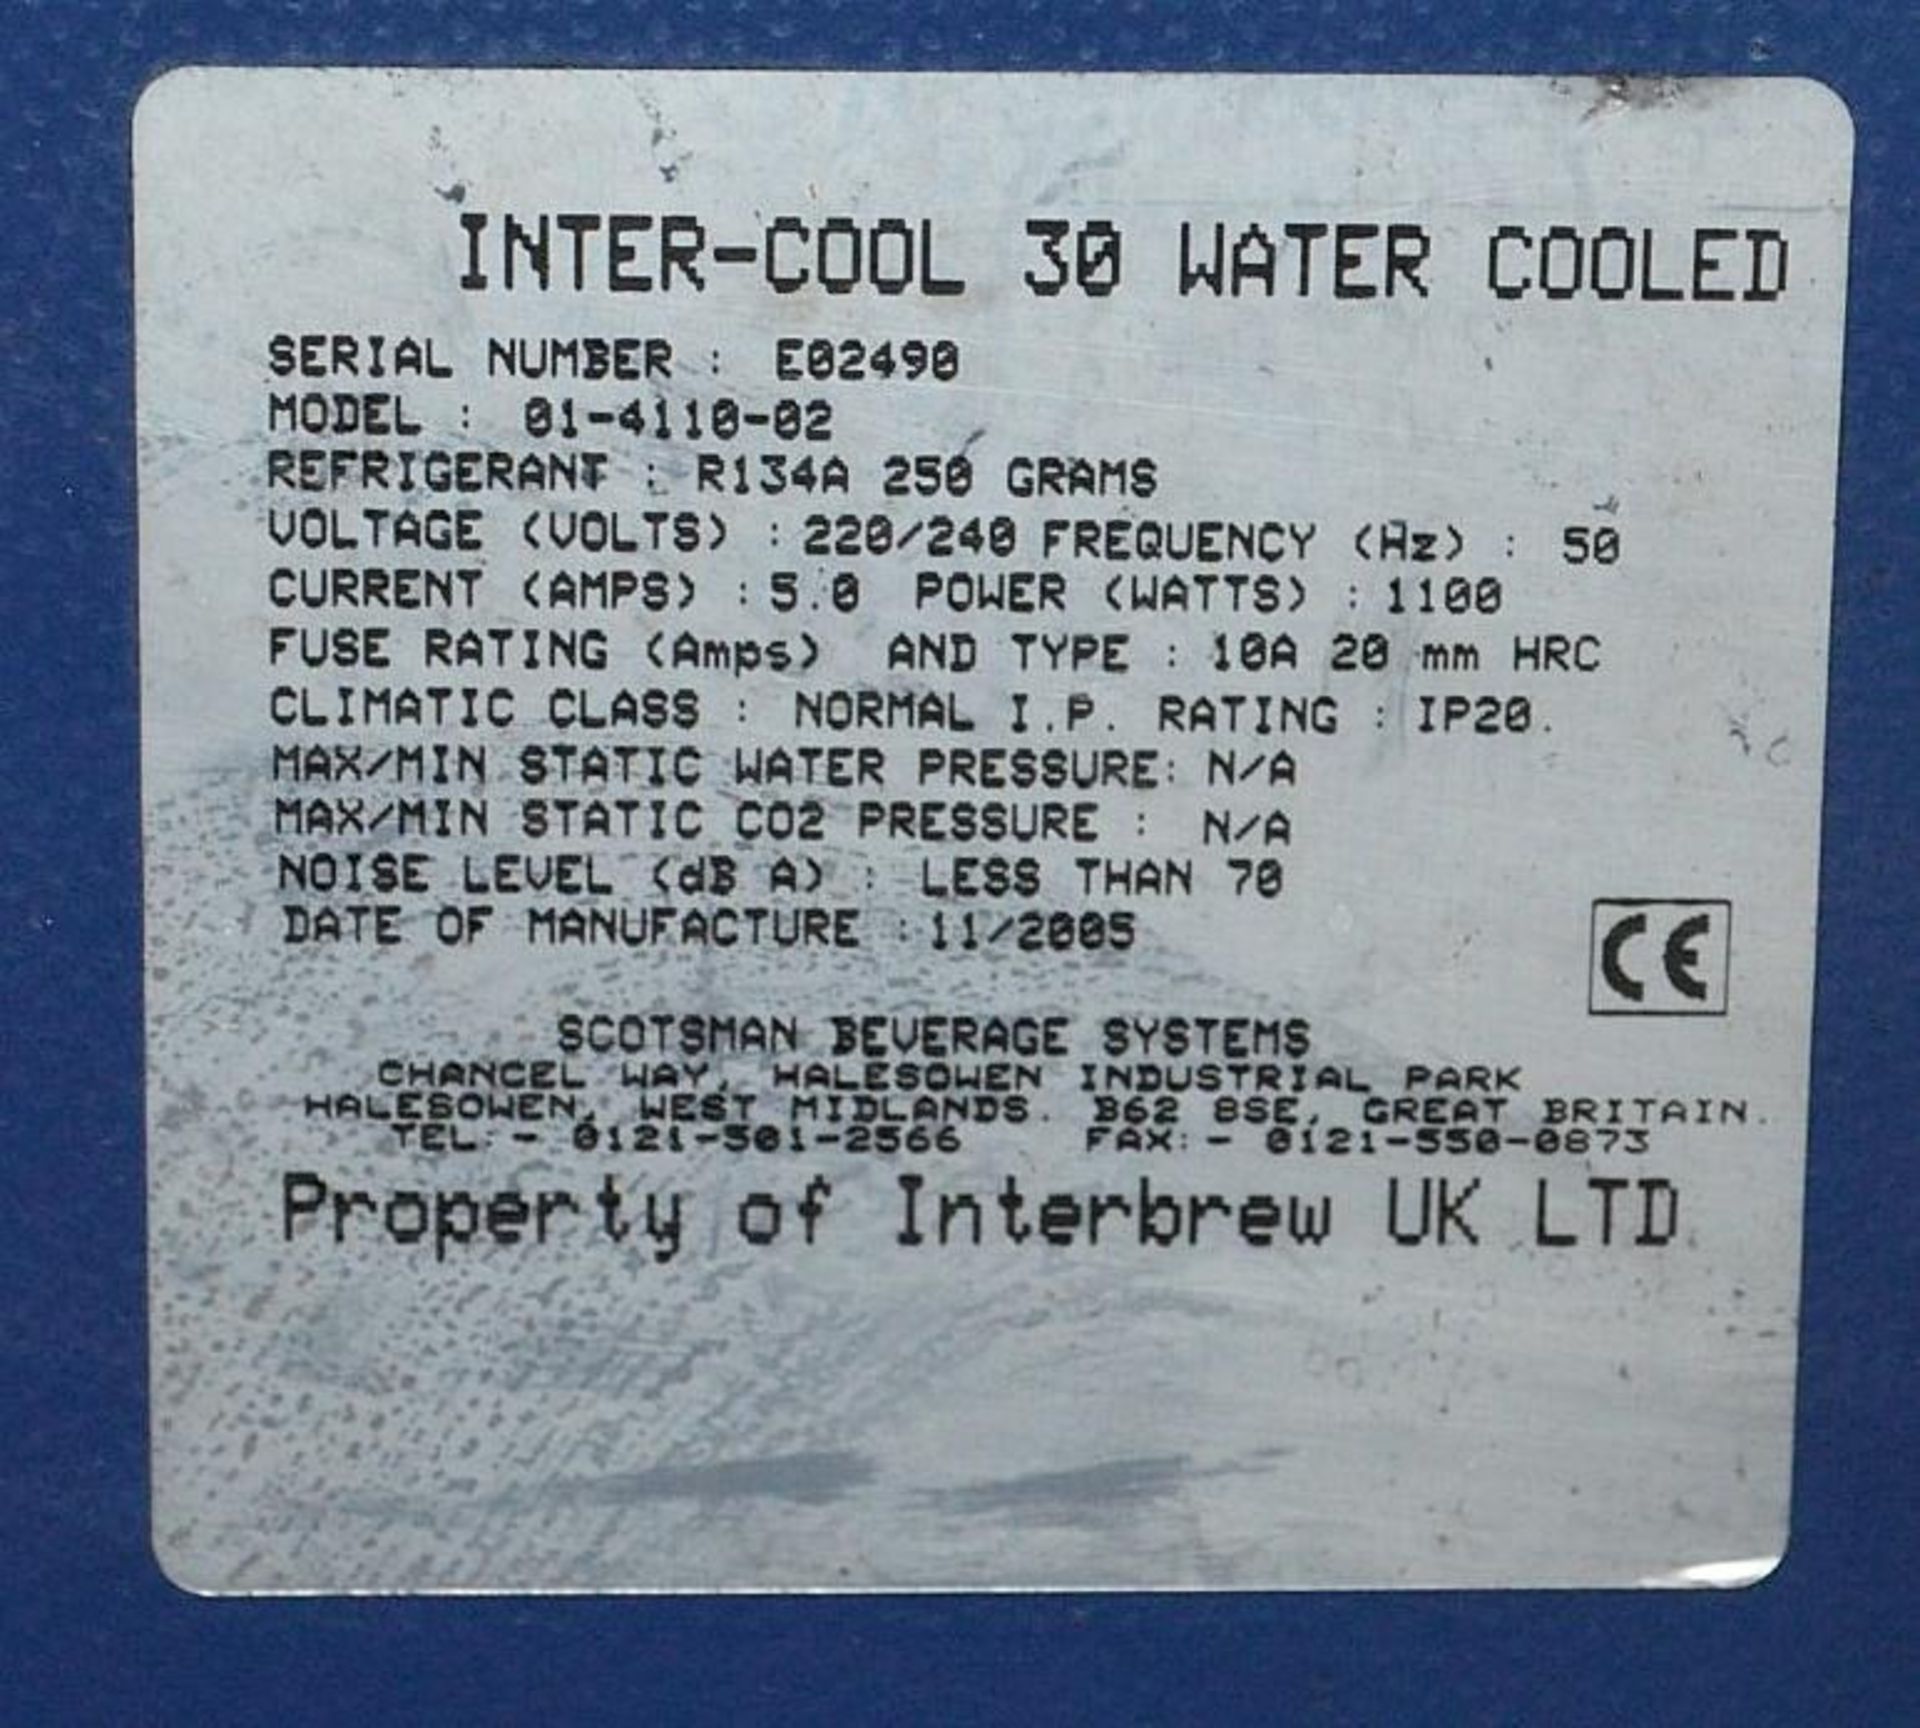 1 x Inter Cool 30 Water Cooled Brewery Cooler - Model 01-4110-2 - CL363 - Ref CQ139 - Location: Stev - Image 2 of 5